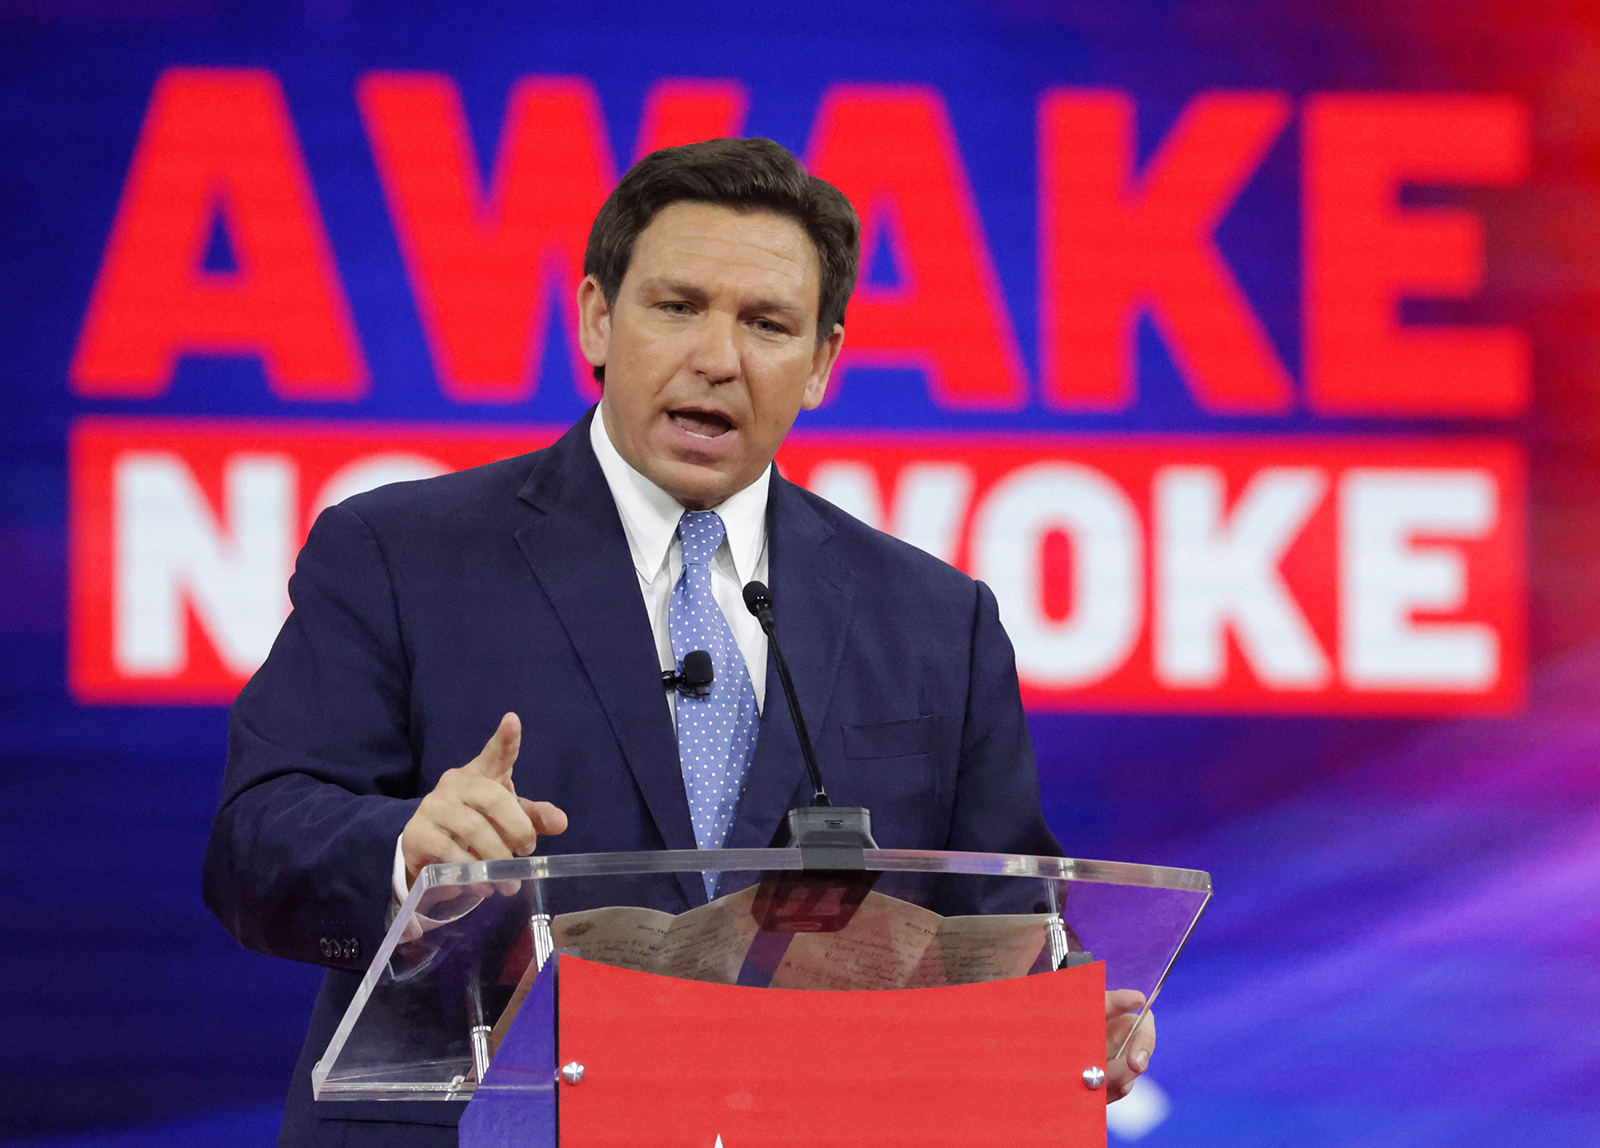 Florida Gov. Ron DeSantis delivers remarks at the 2022 CPAC conference in Orlando, Fla., on Feb. 24, 2022. (Joe Burbank—Orlando Sentinel/Getty Images)